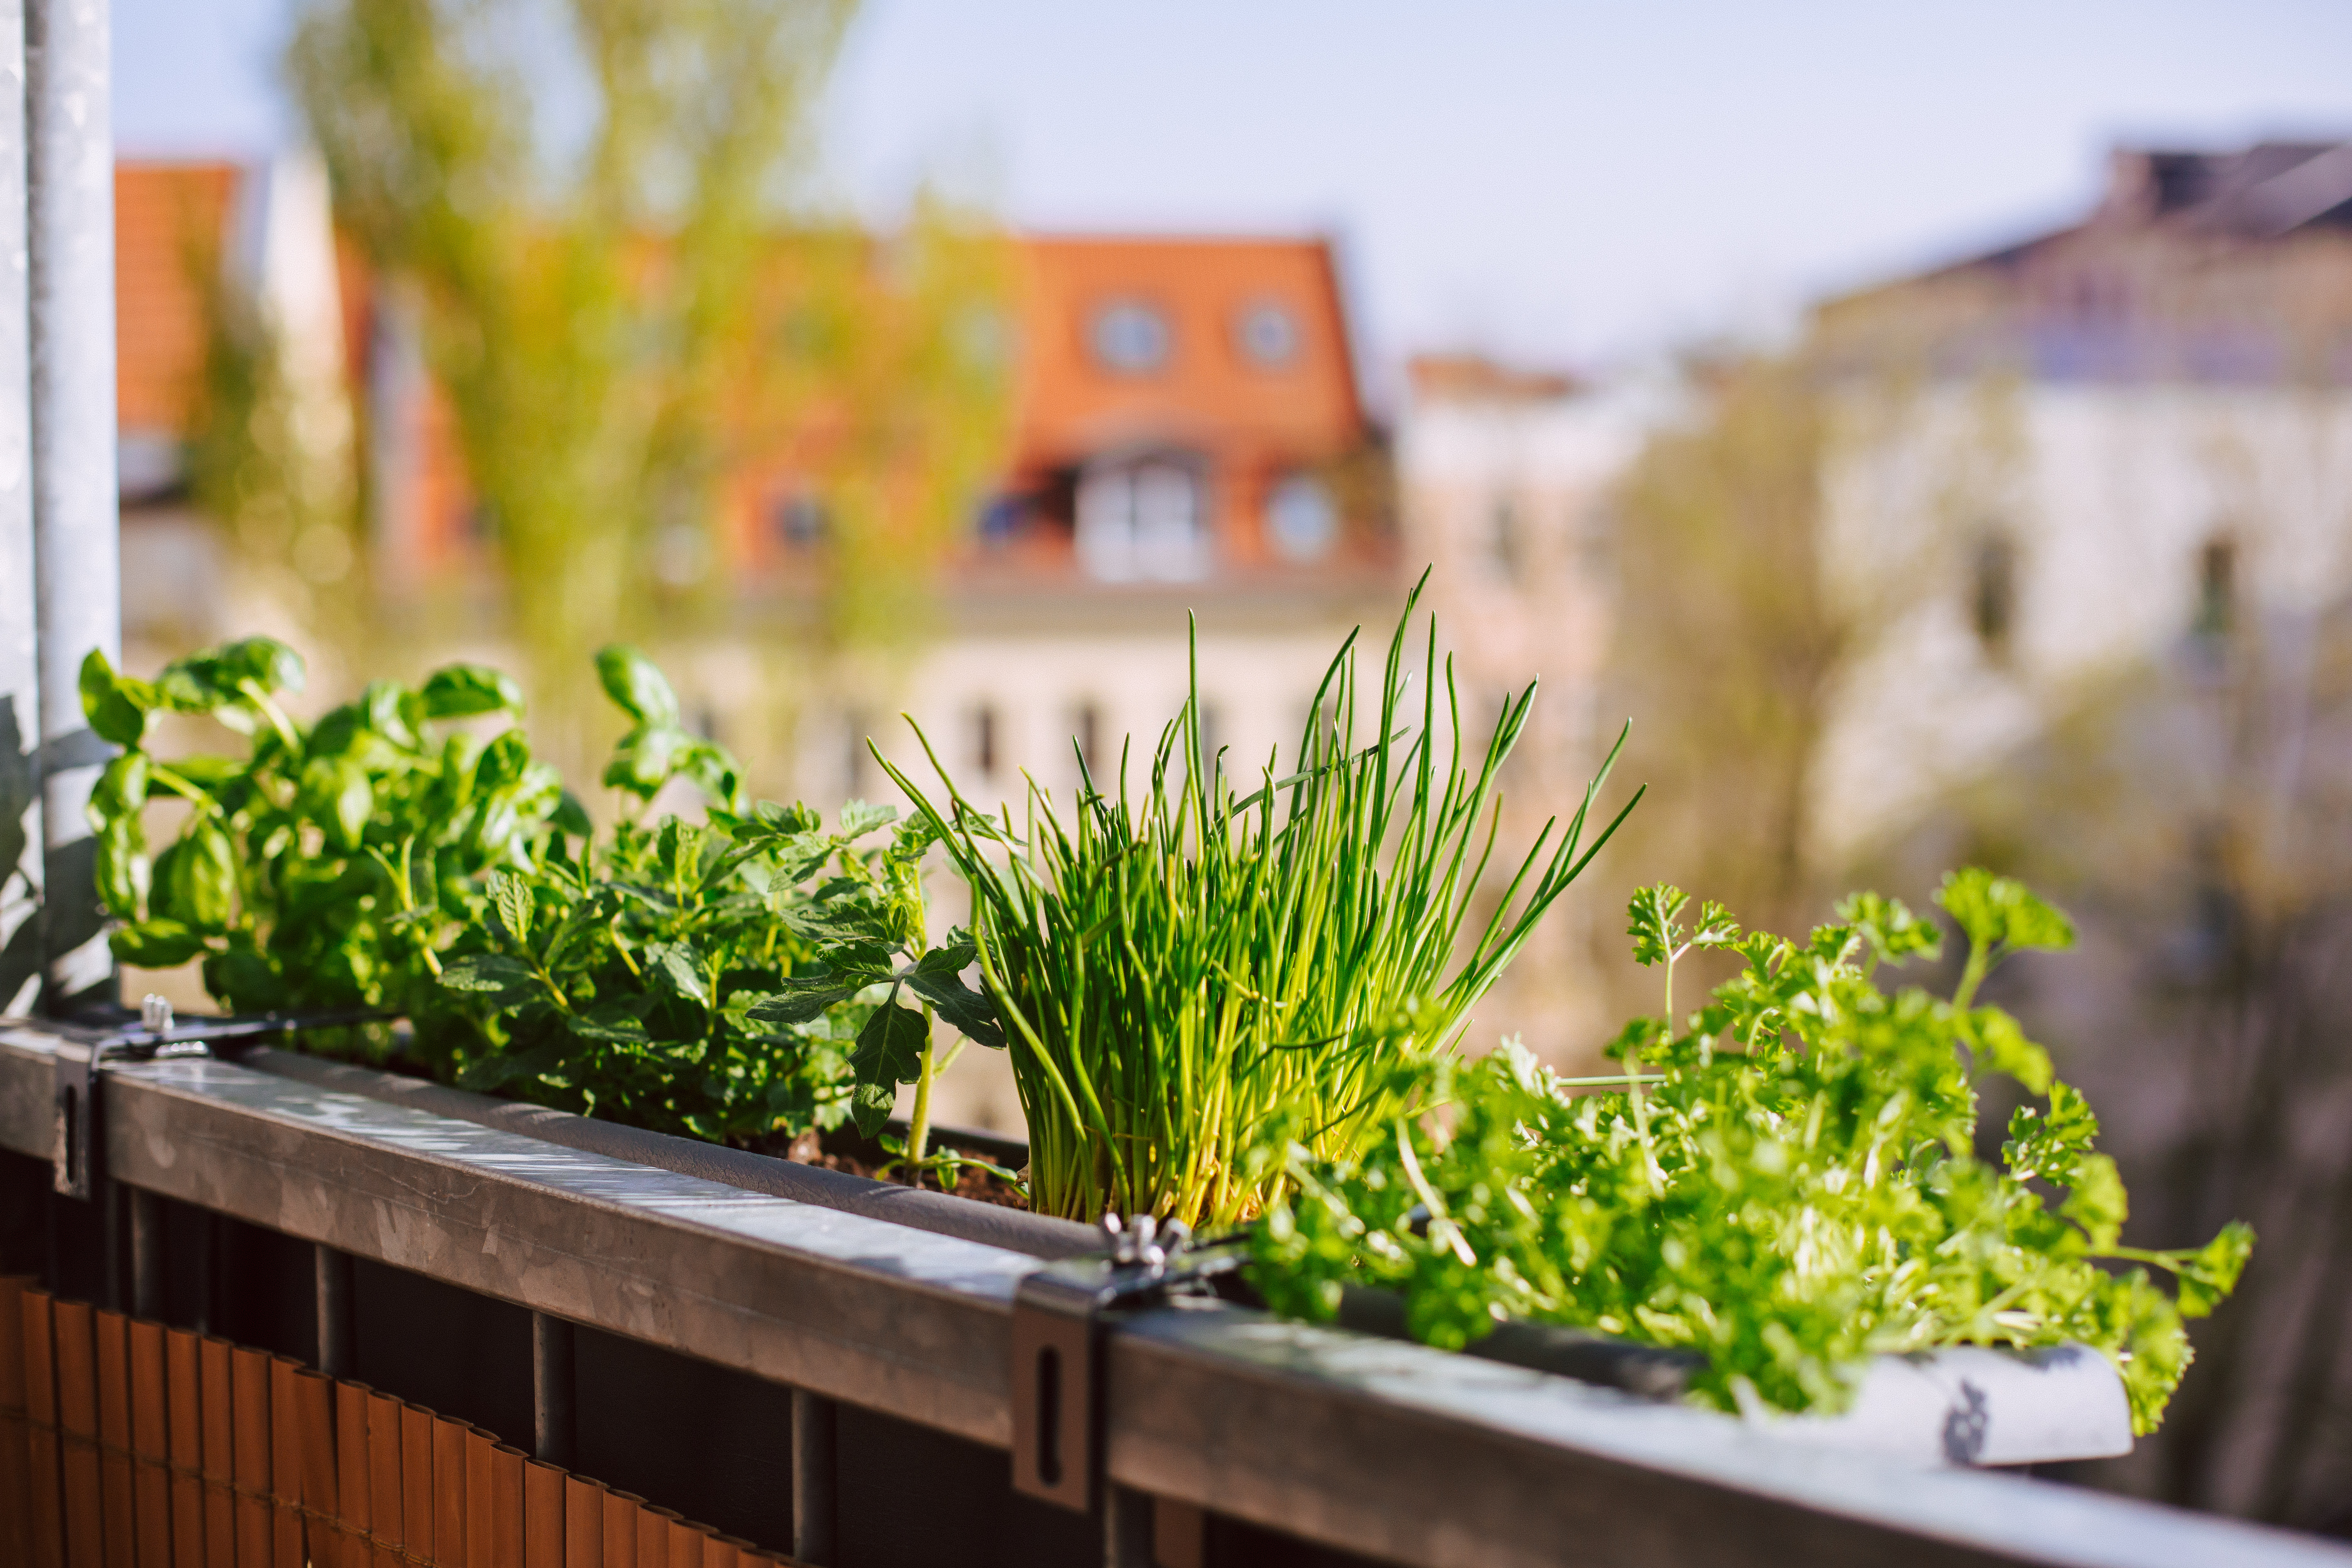 Grow your own fresh herbs year-round!